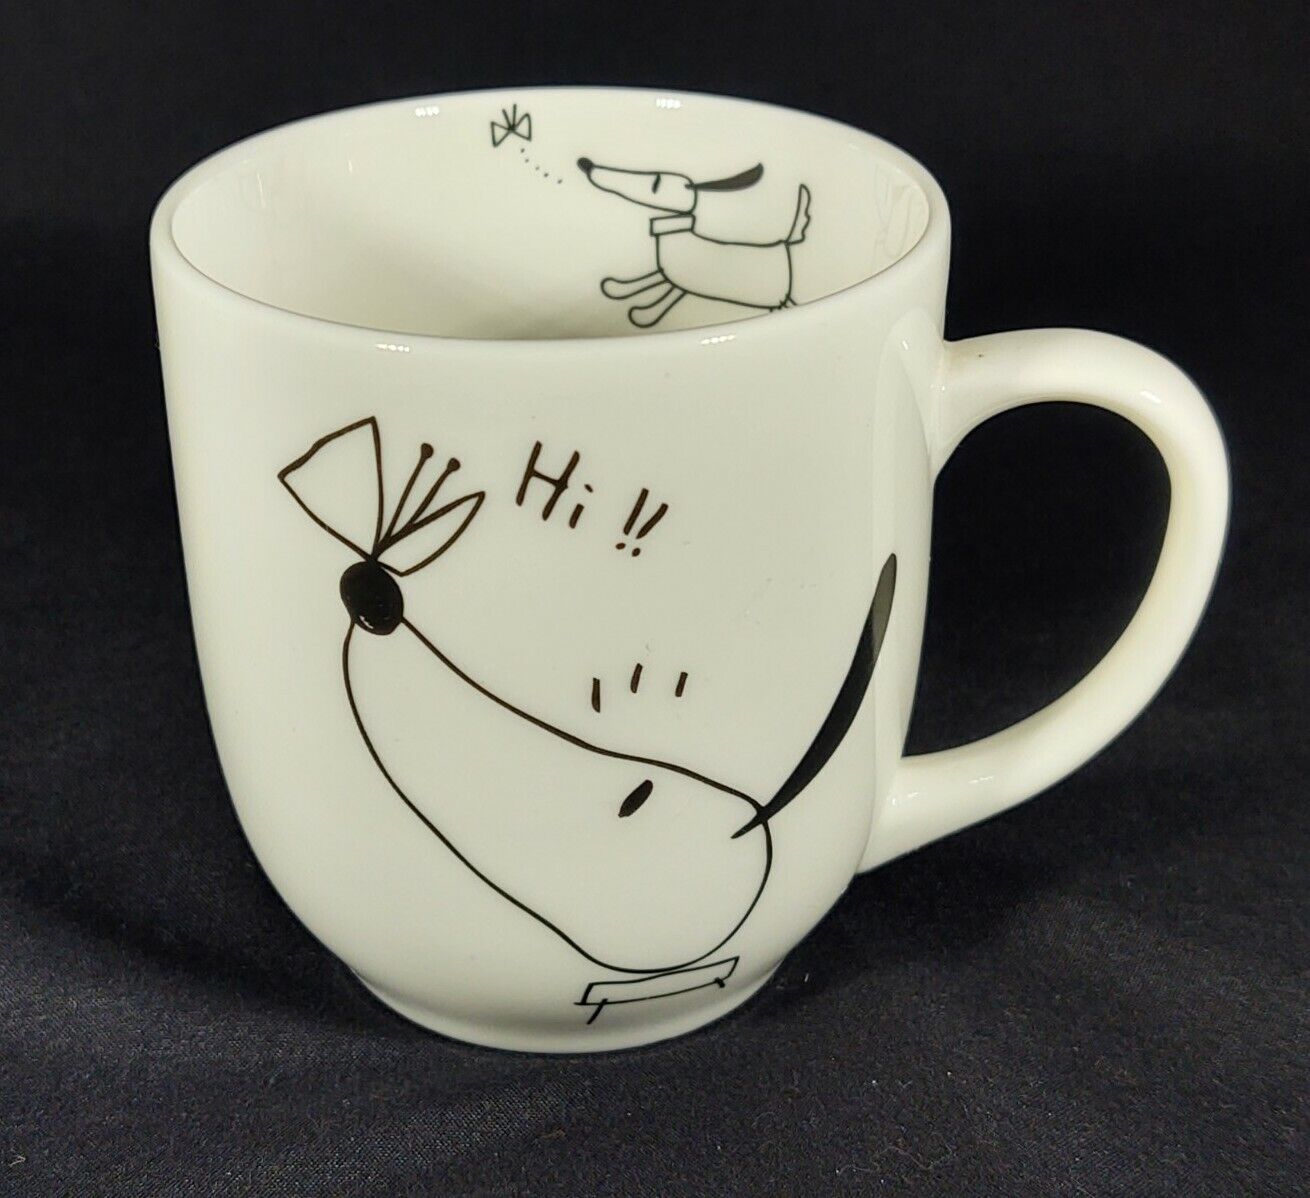 KMC Ceramic Cup Illustrated In Line Drawing Dog and Butterfly.